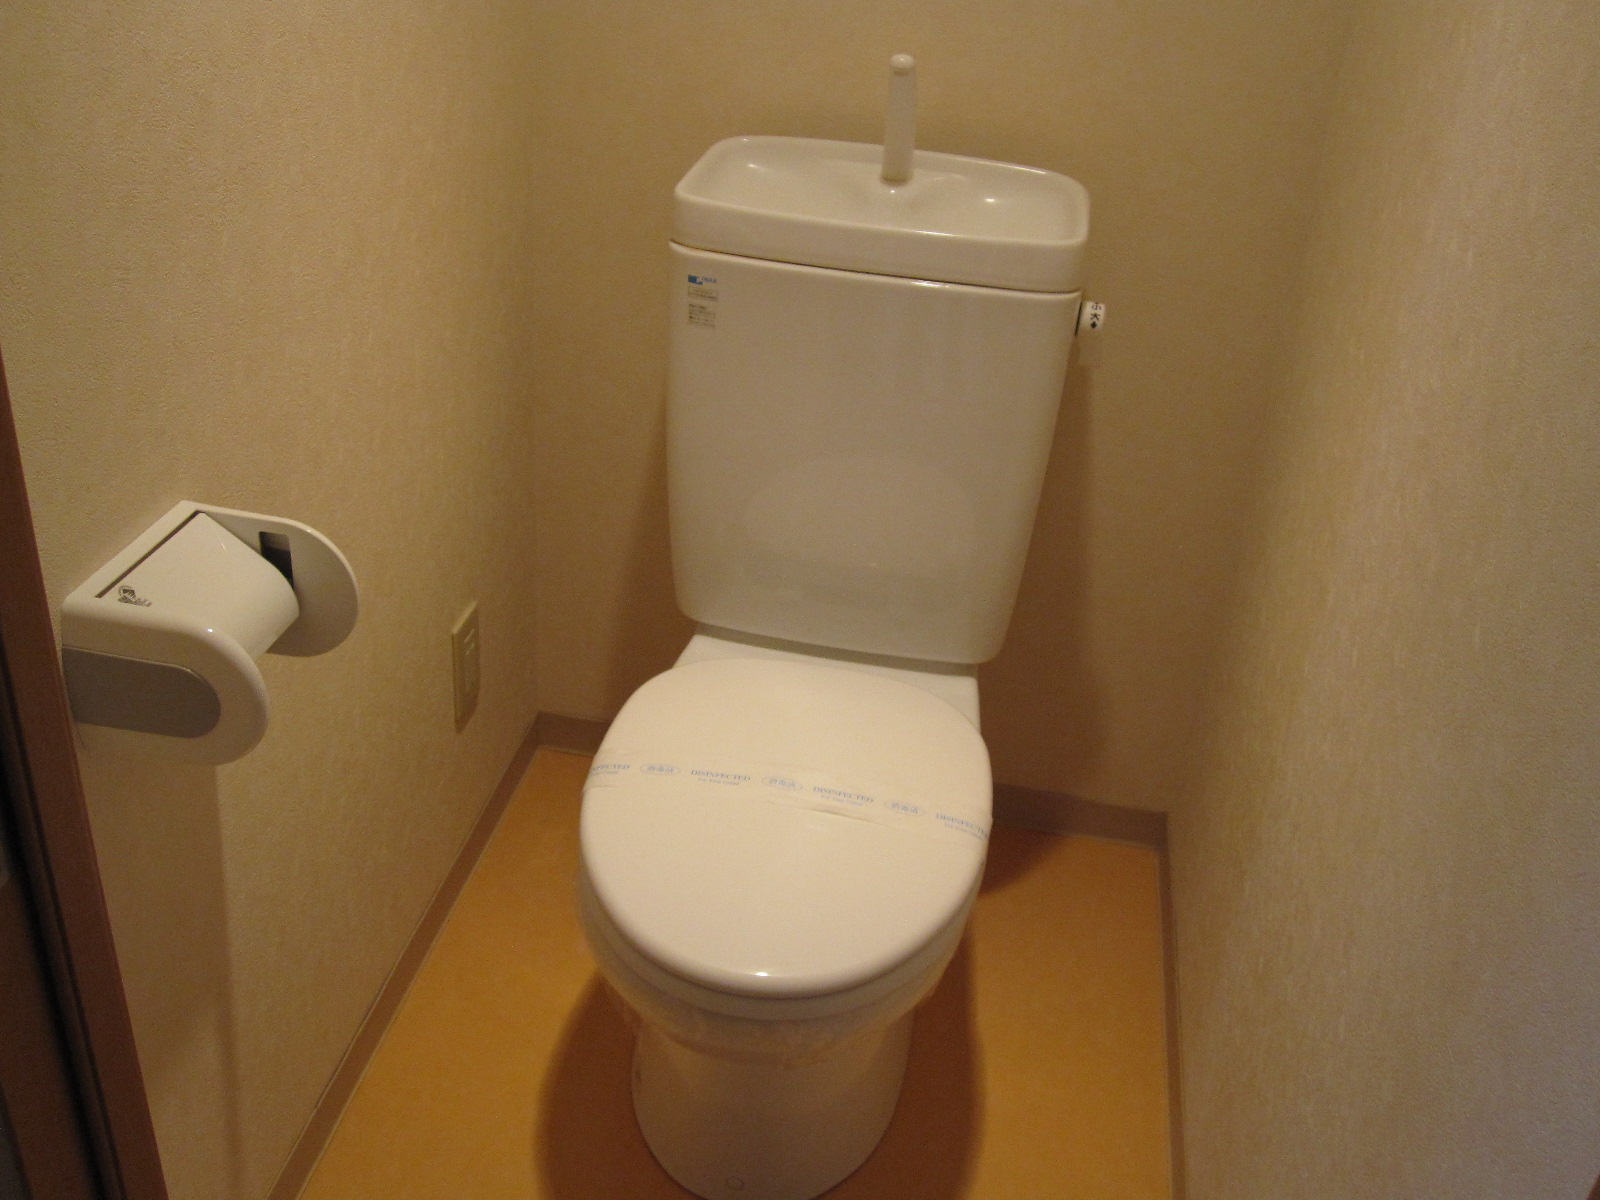 Toilet. Since there is an electrical outlet can be installed Wosuretto